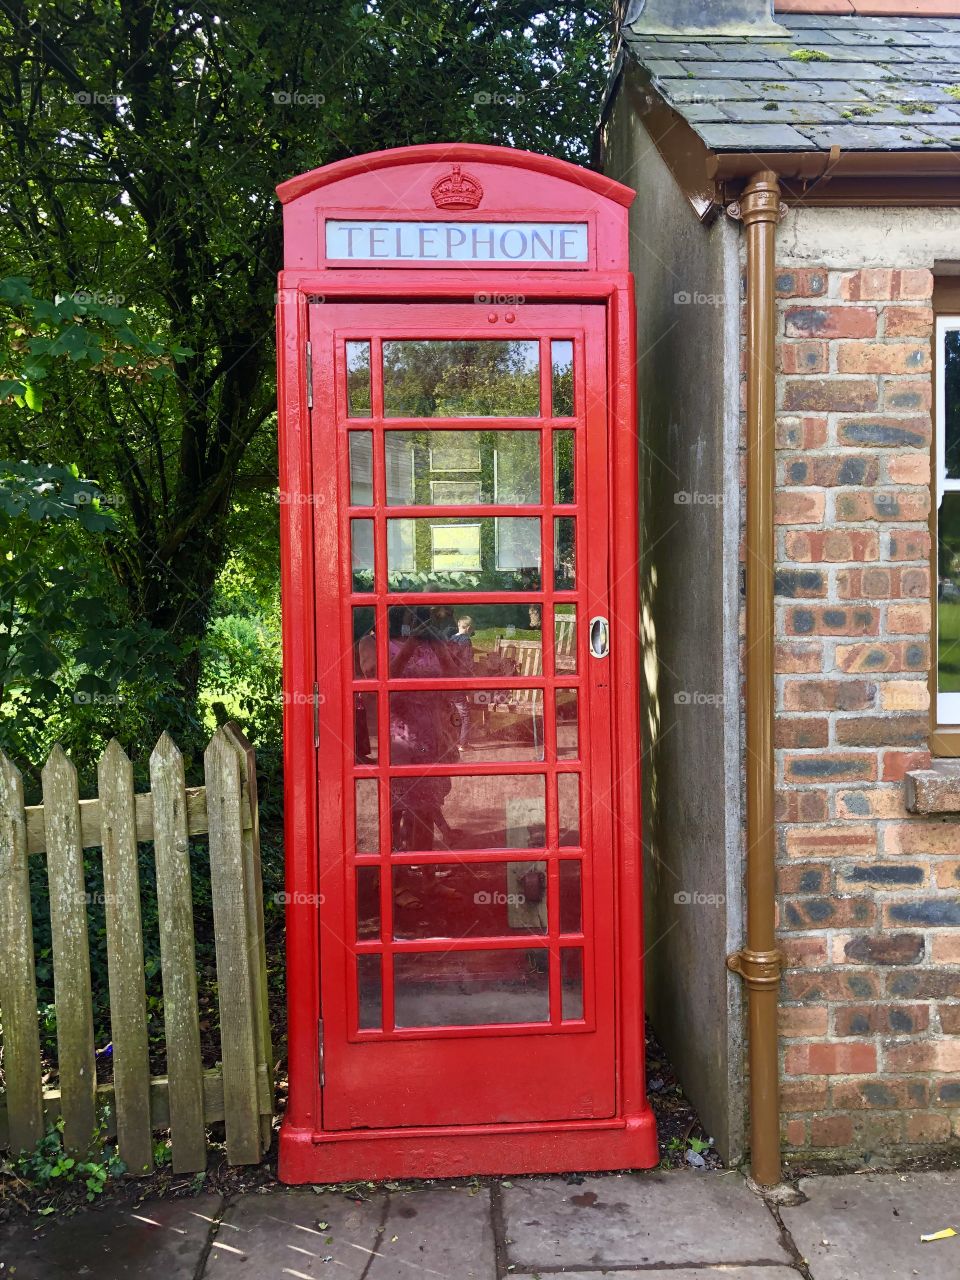 The old telephone box 